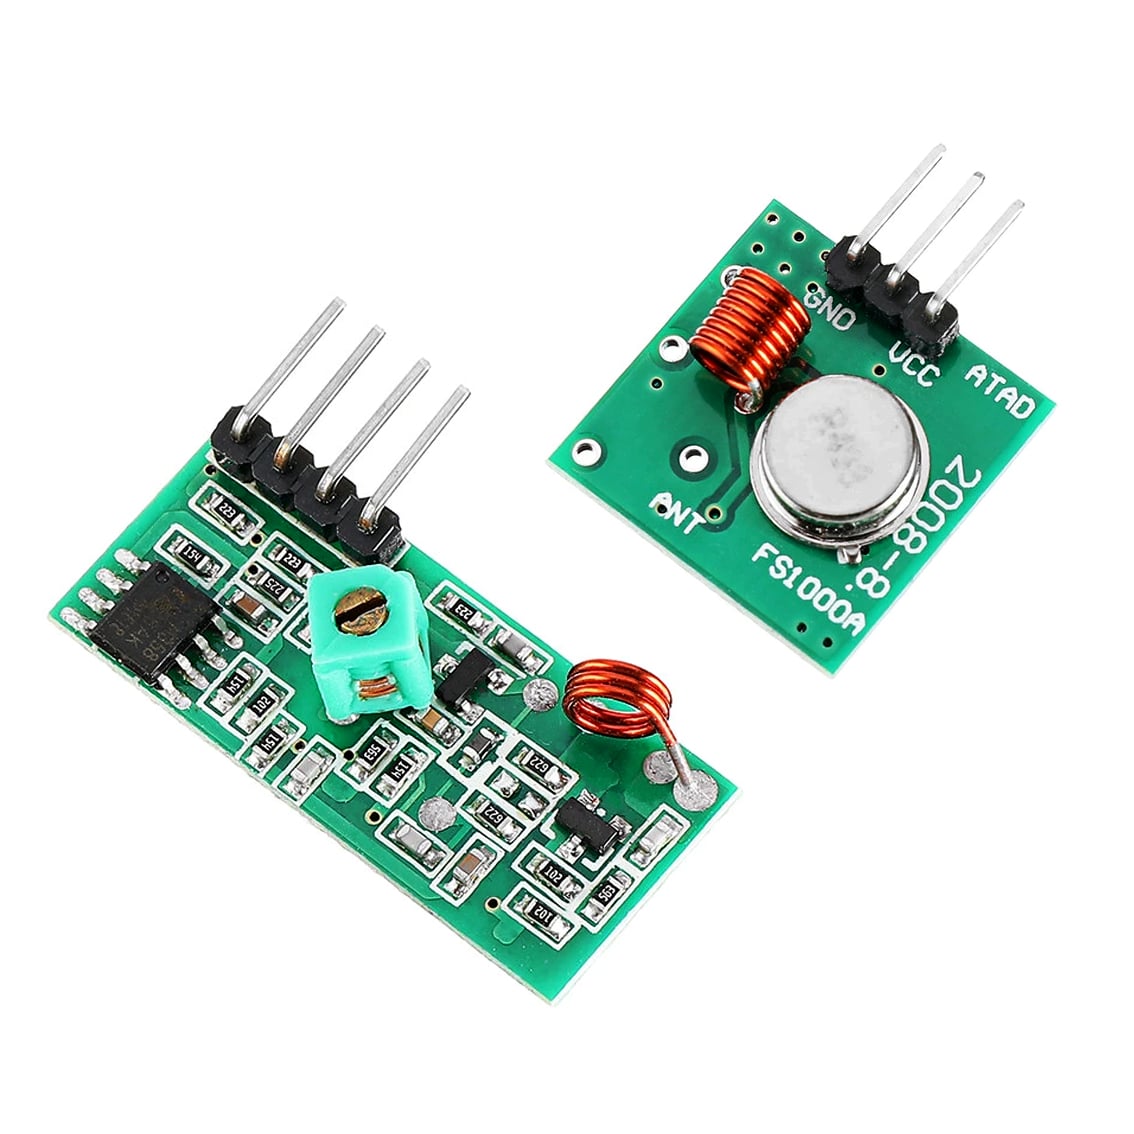 PHI1072291 – 433MHz RF Wireless Transmitter and Receiver Module Kit 01